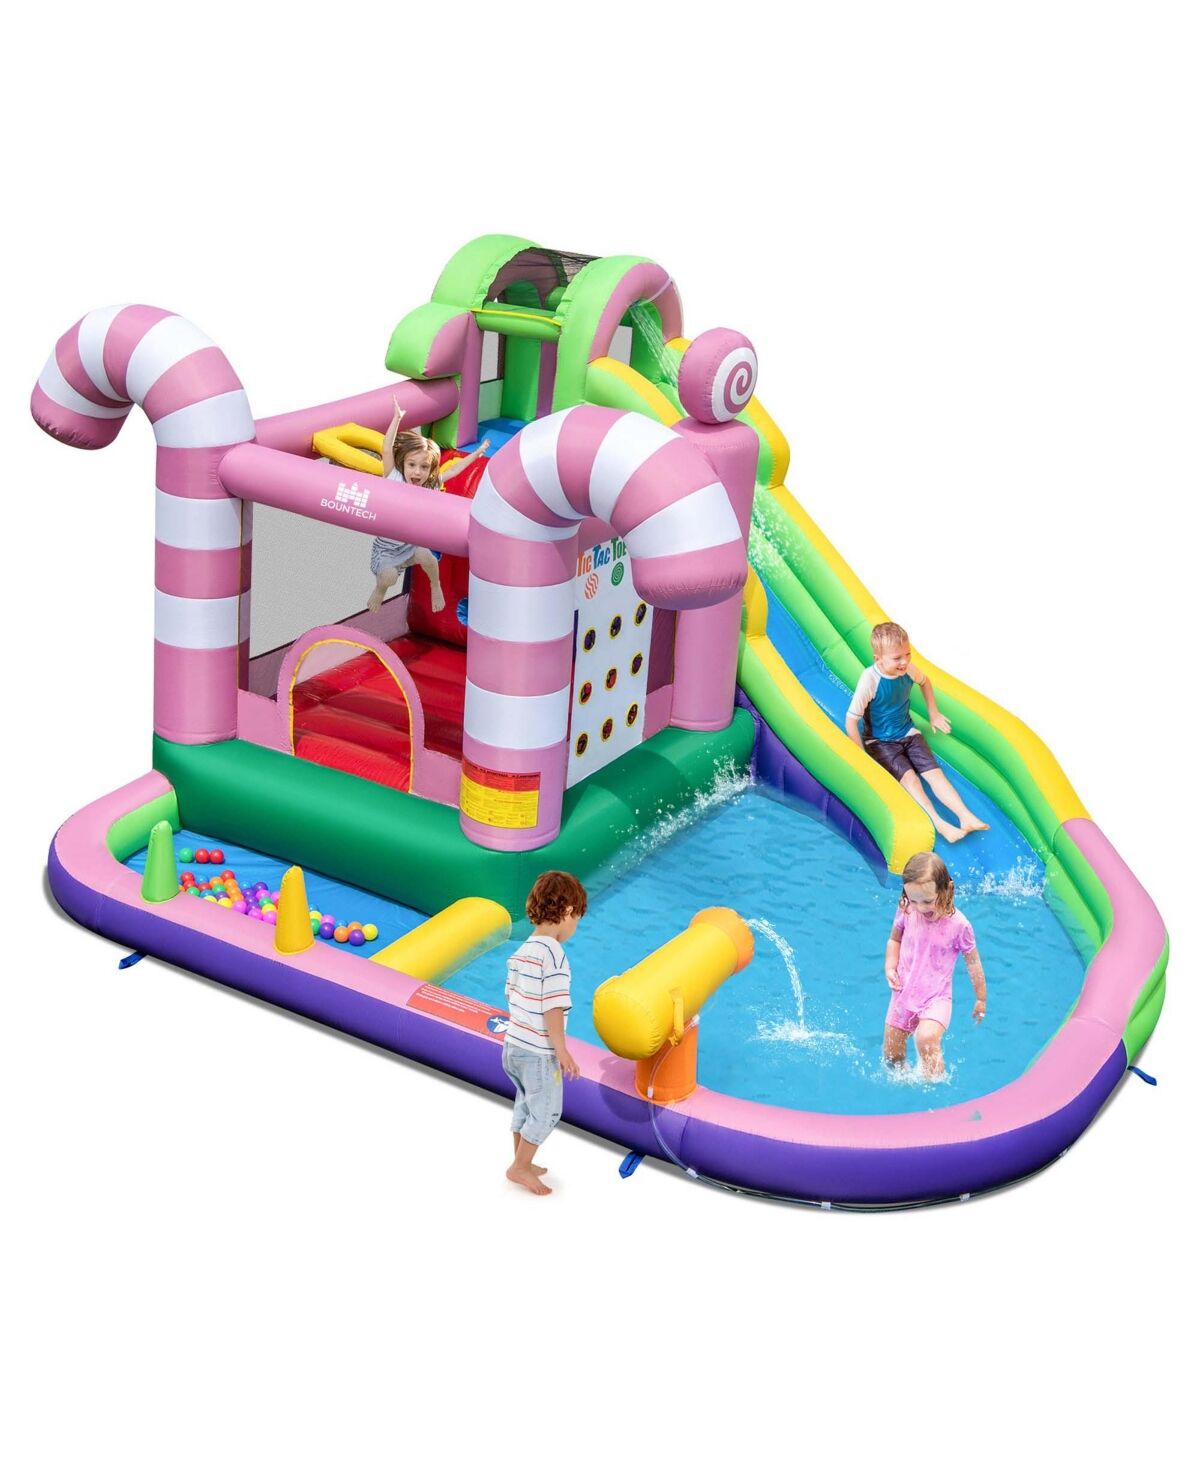 Costway 9-in-1 Inflatable Bounce House Sweet Candy Water Slide Park Pool without Blower - Assorted pre-pack